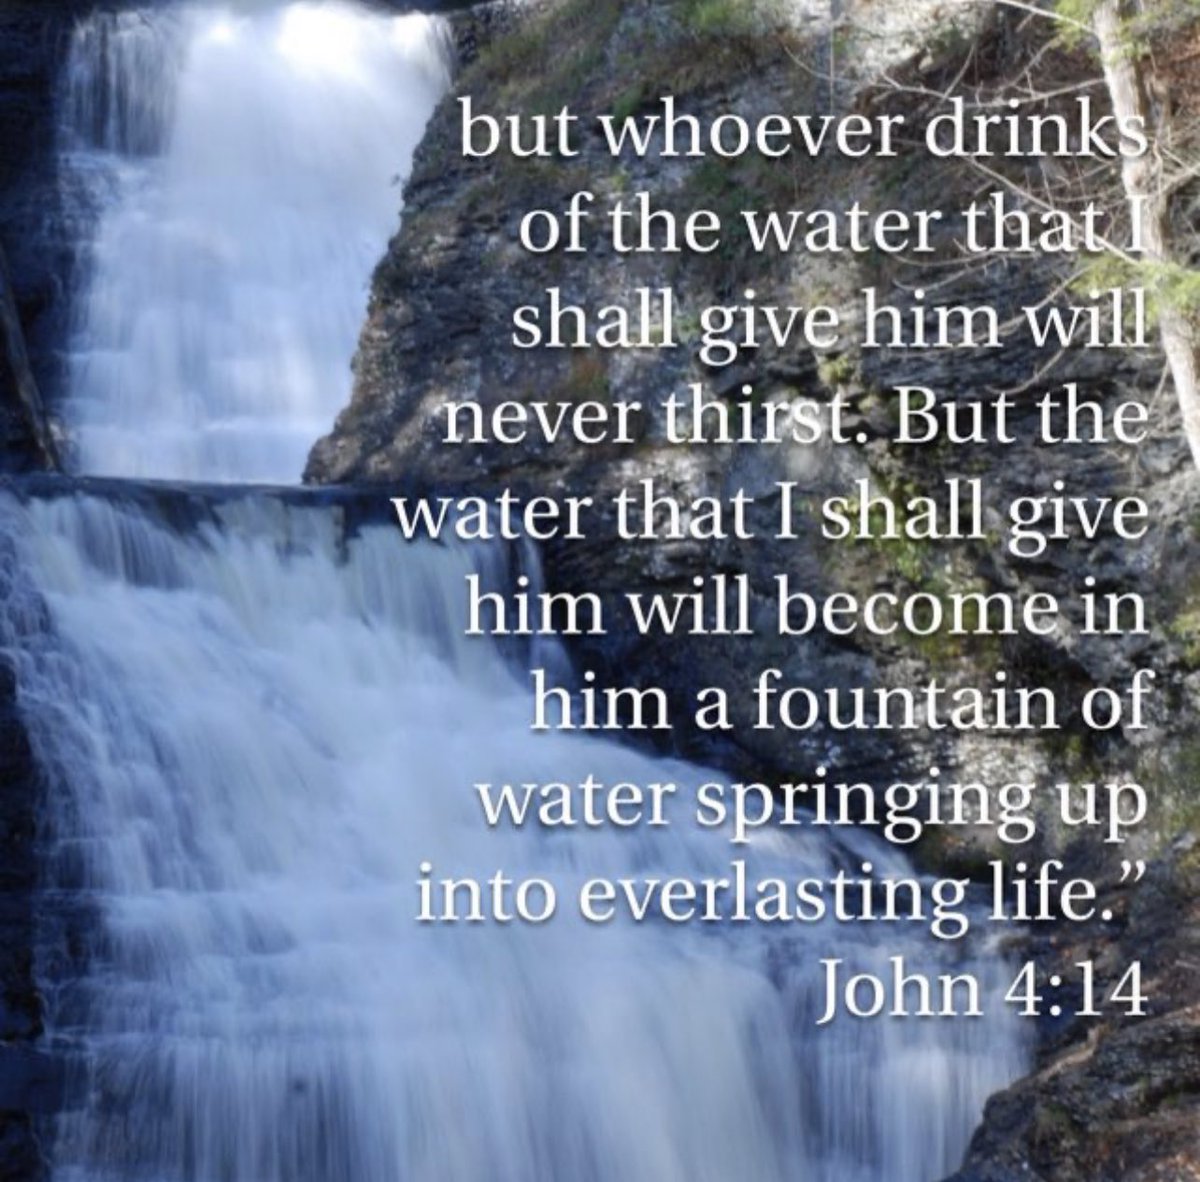 #ThingsJesusSaid
 John 4:14 KJV
“But whosoever drinketh of the water that I shall give him shall never thirst; but the water that I shall give him shall be in him a well of water springing up into everlasting life.” 
 #ThirstyThursday
#Believe